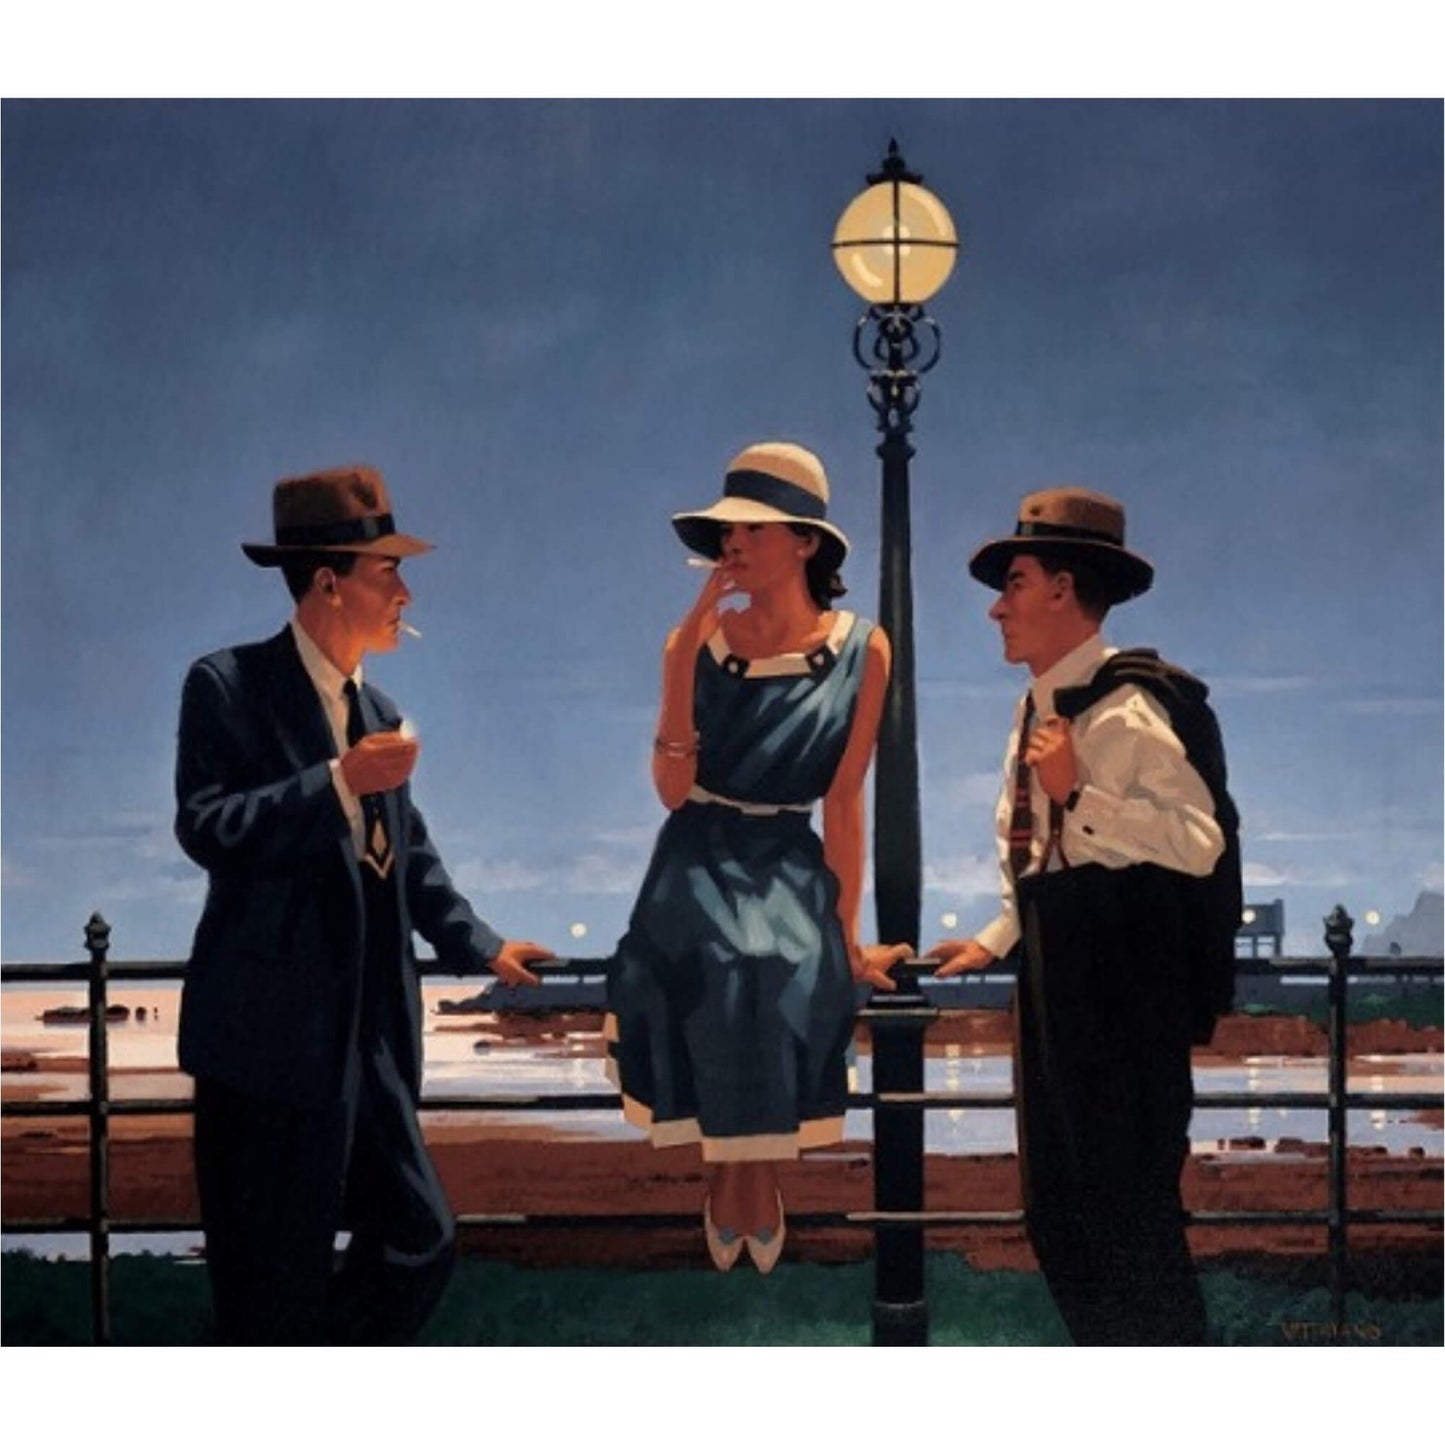 Game of Life Limited Edition Print Jack Vettriano